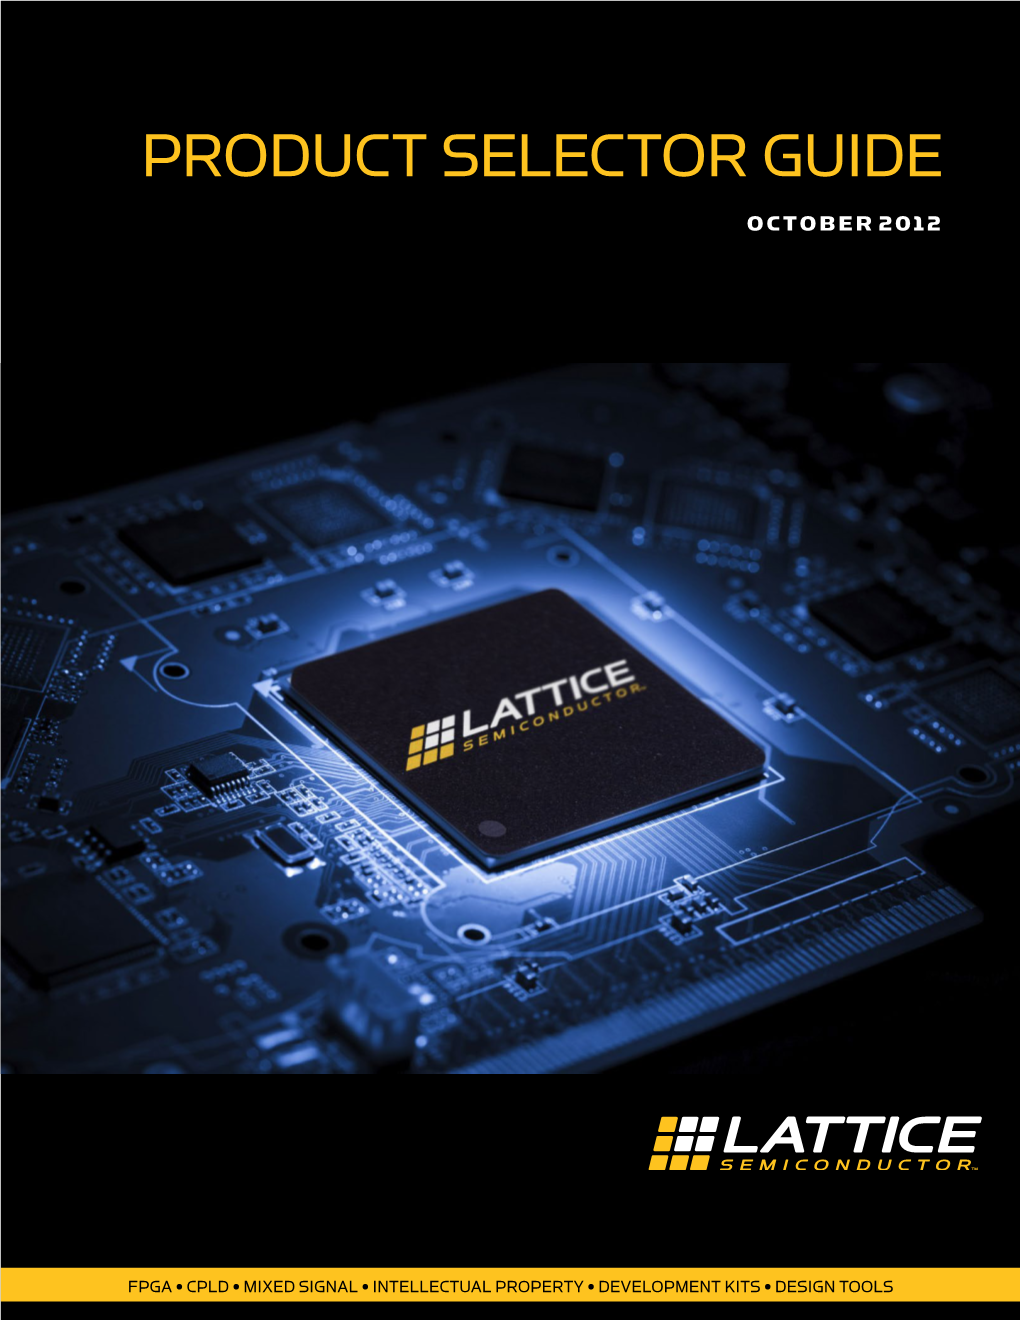 Product Selector Guide October 2012